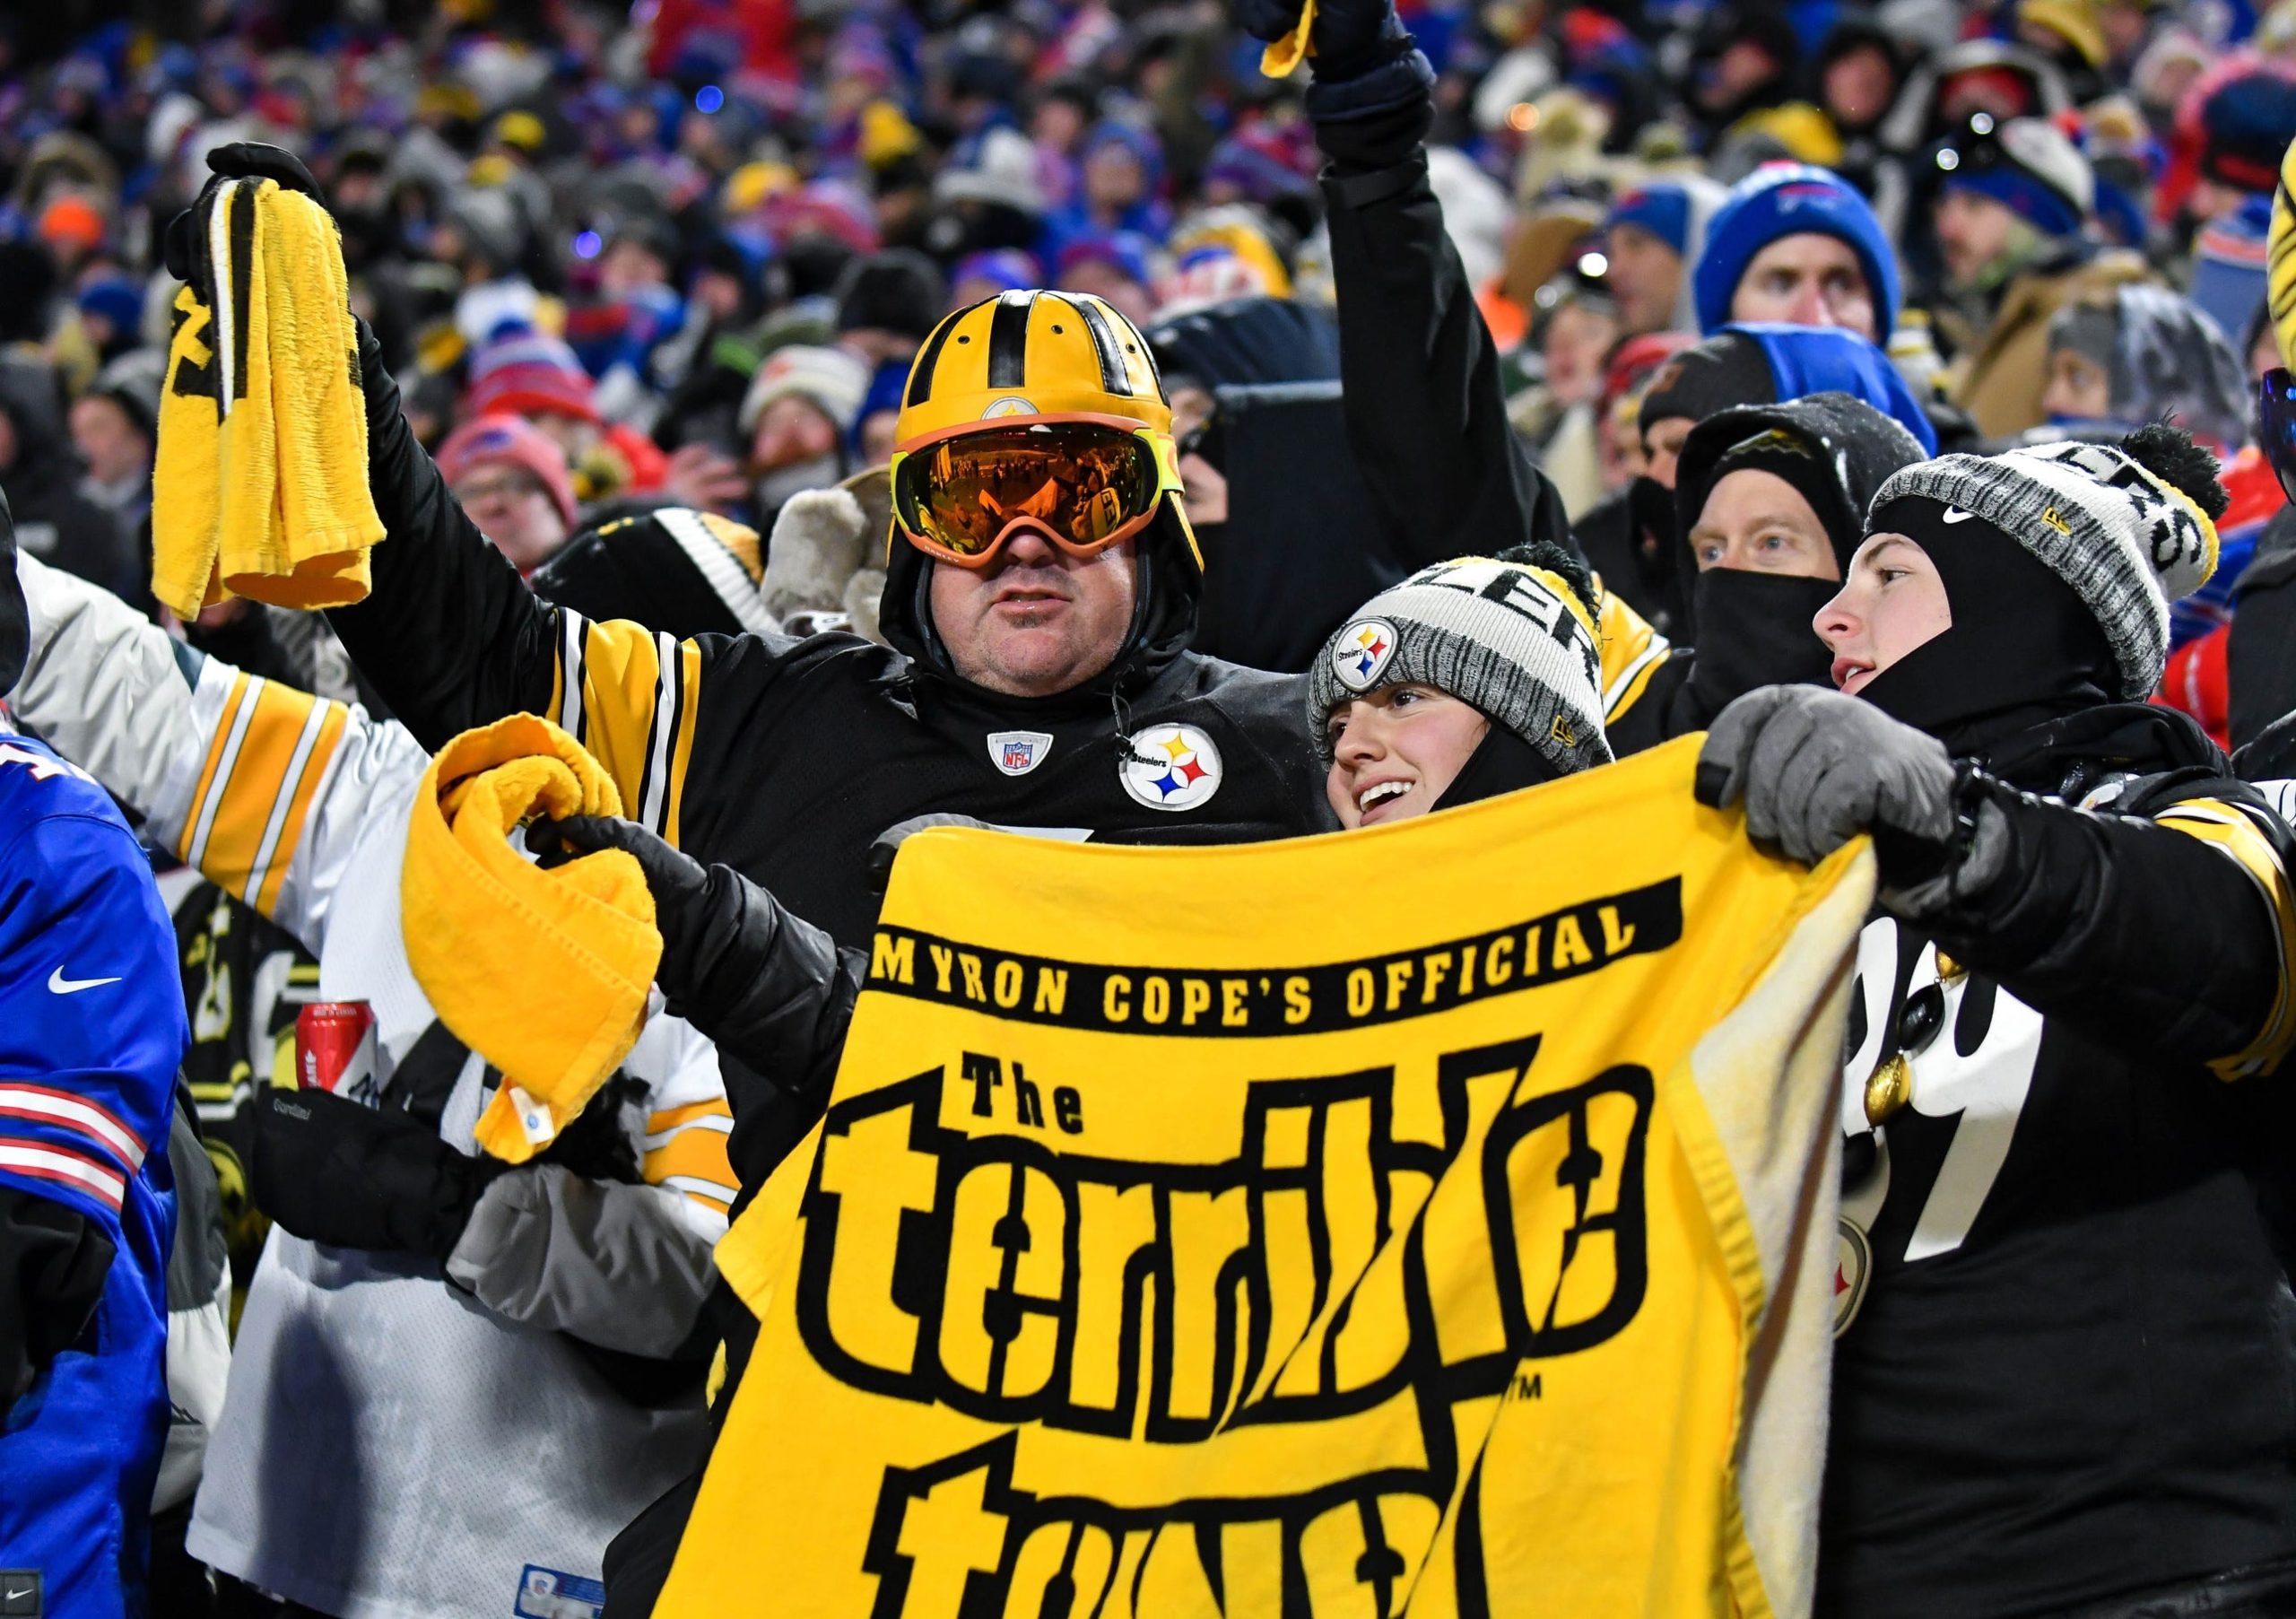 Official Steelers schedule released [Video]